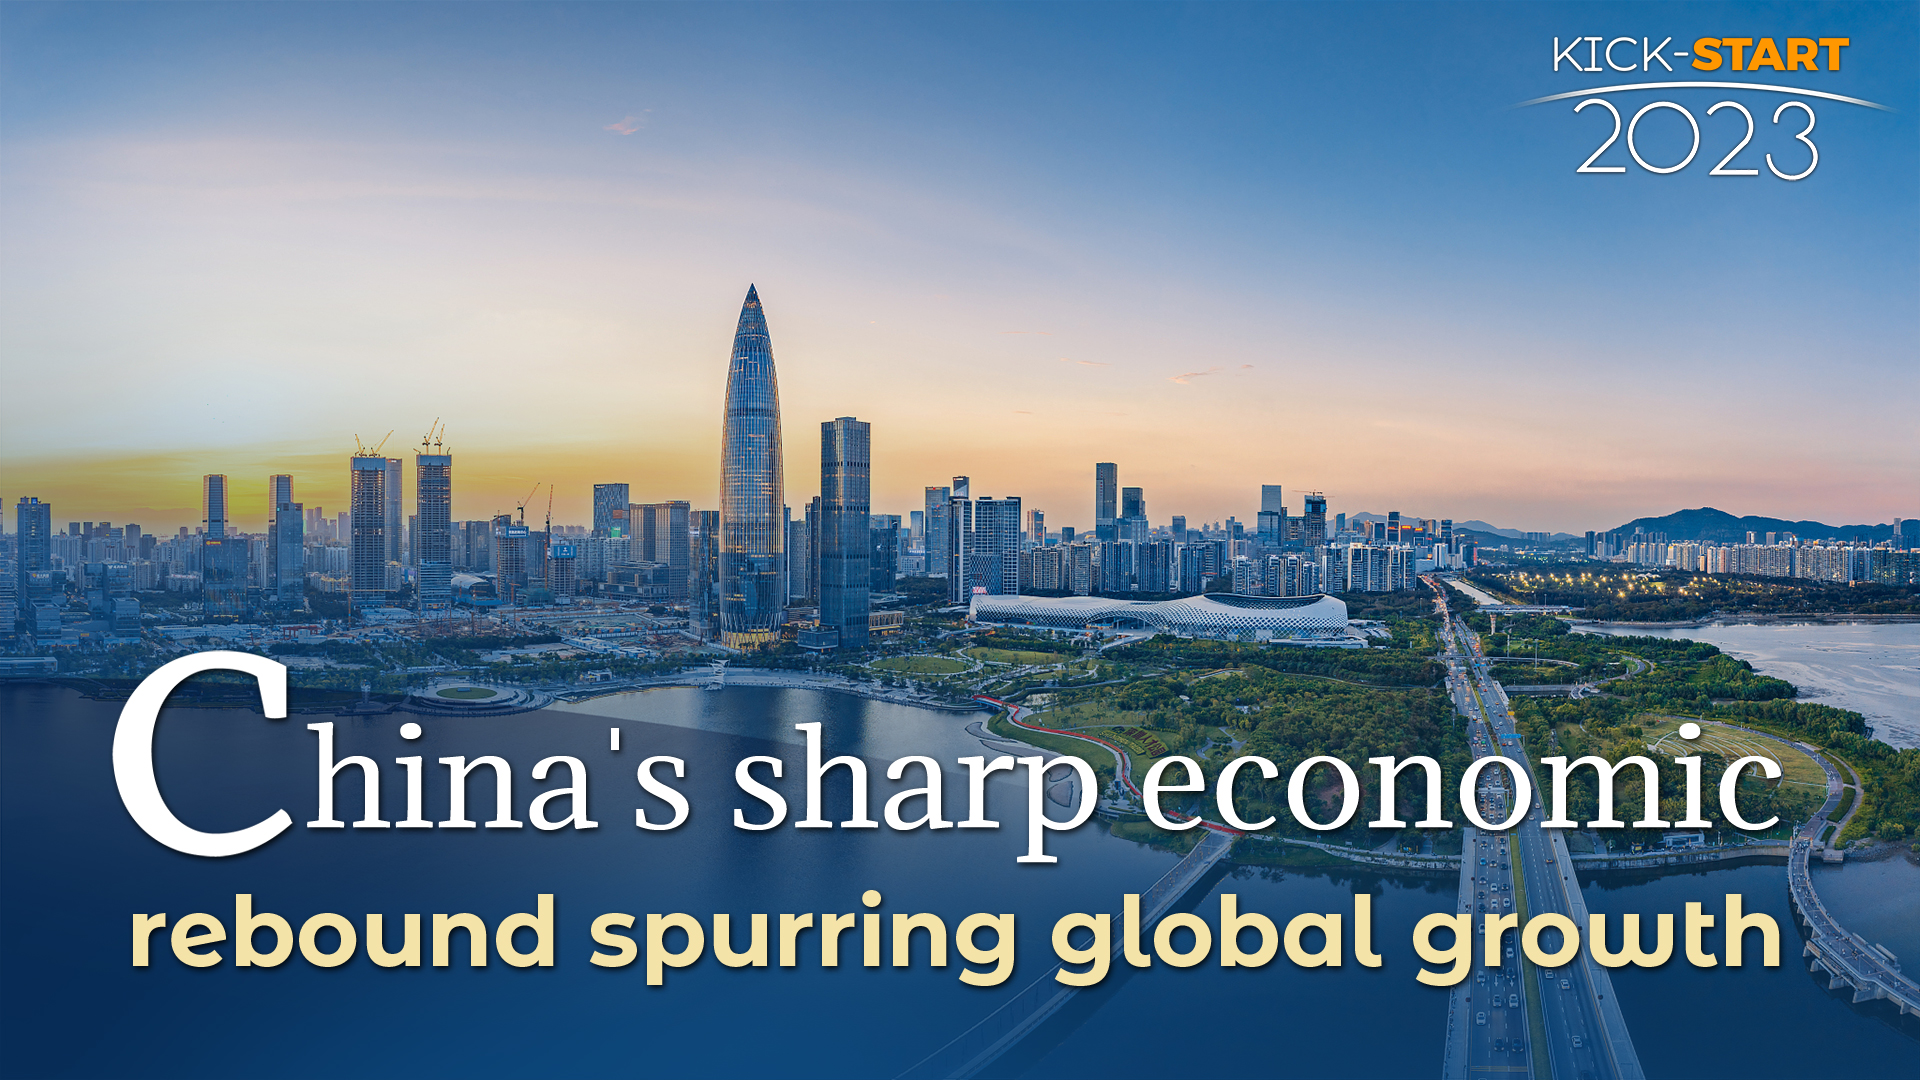 China's fast economic rebound spurring global growth